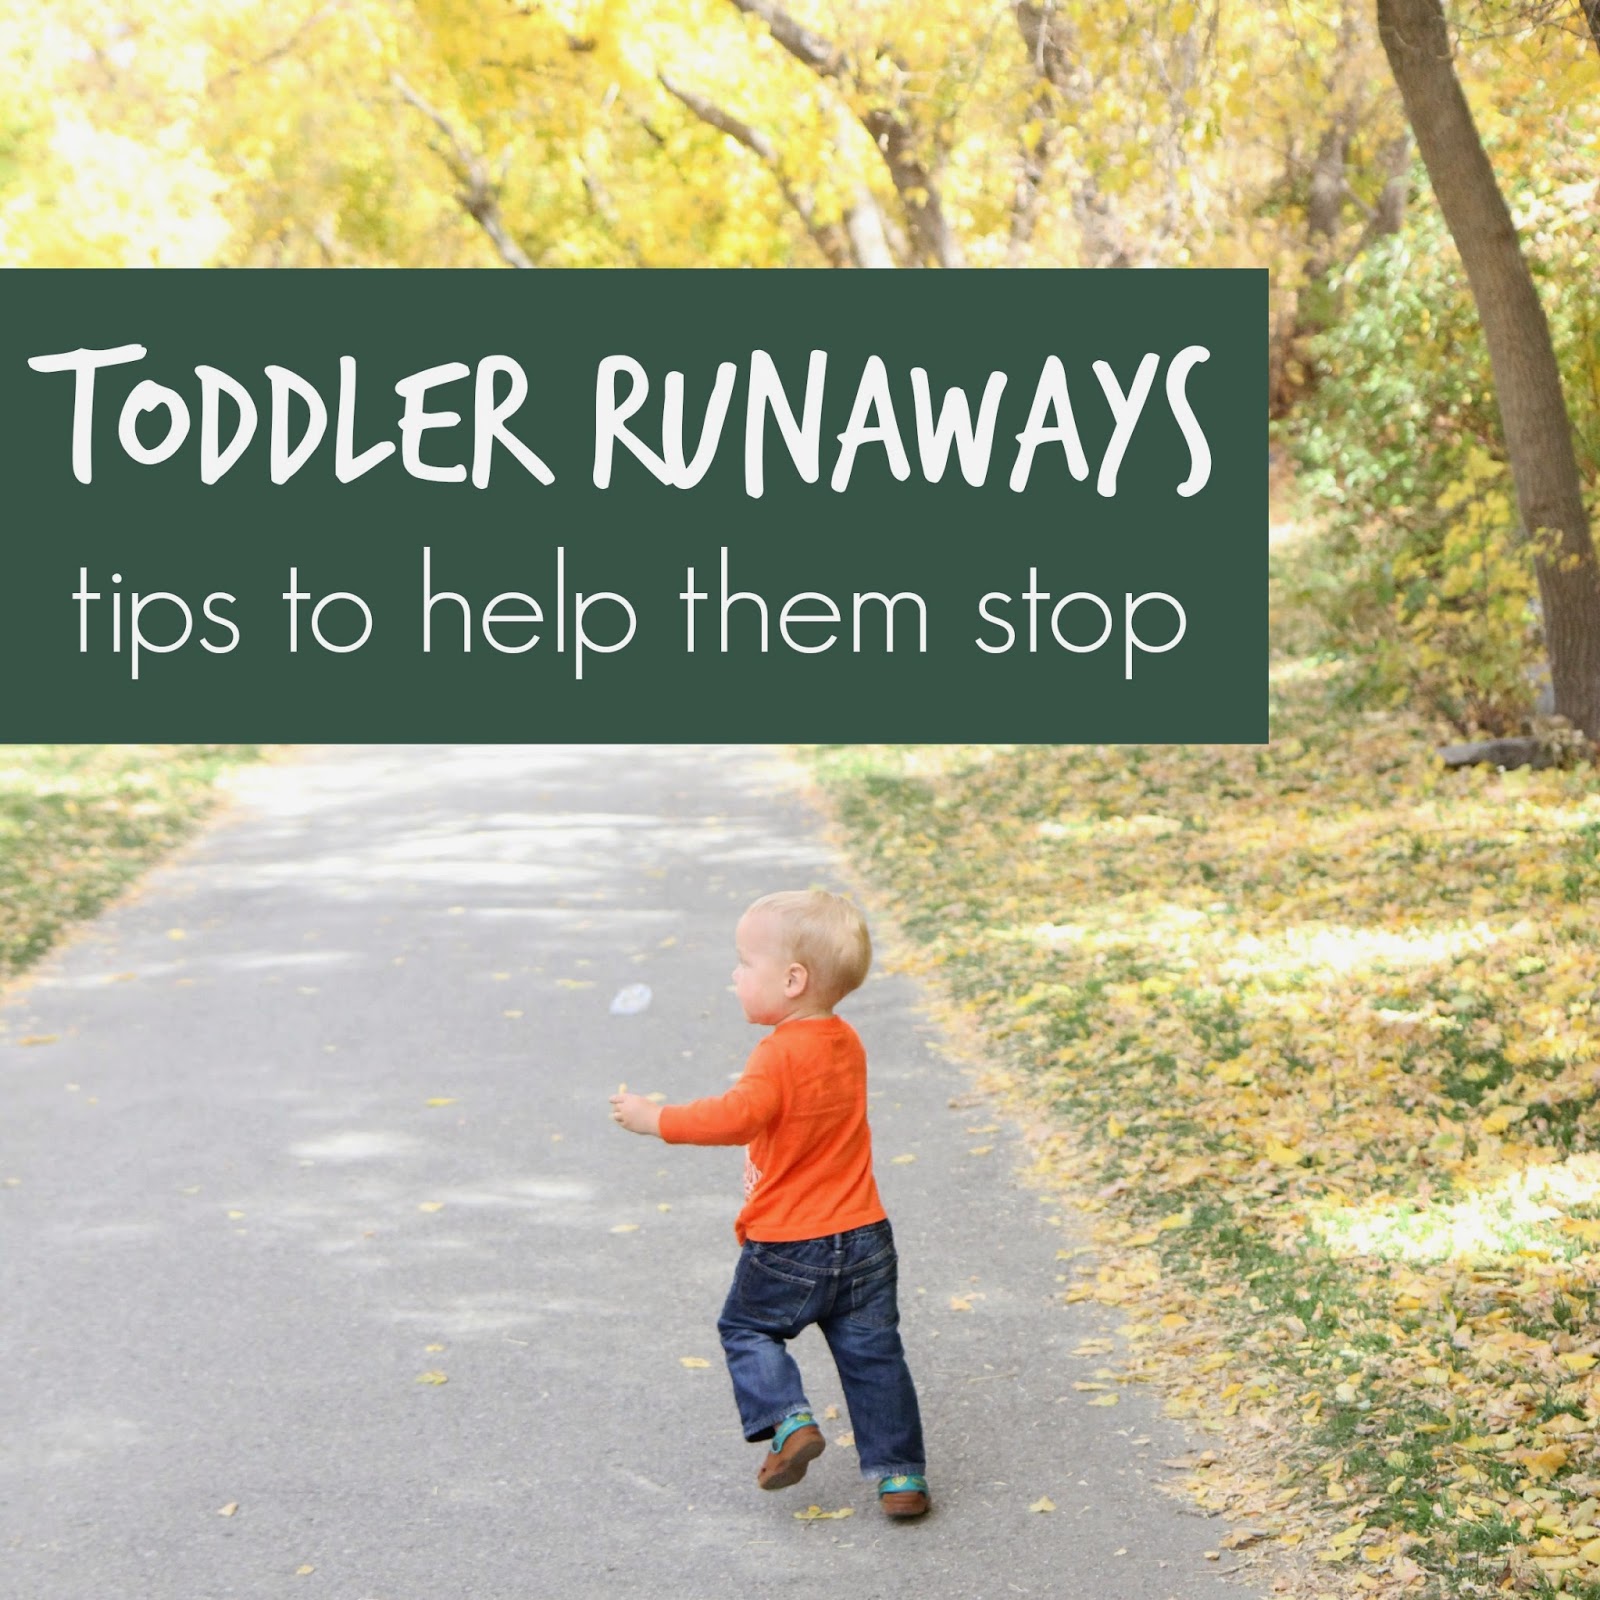 Toddler Approved! How to Stop Your Toddler From Running Away